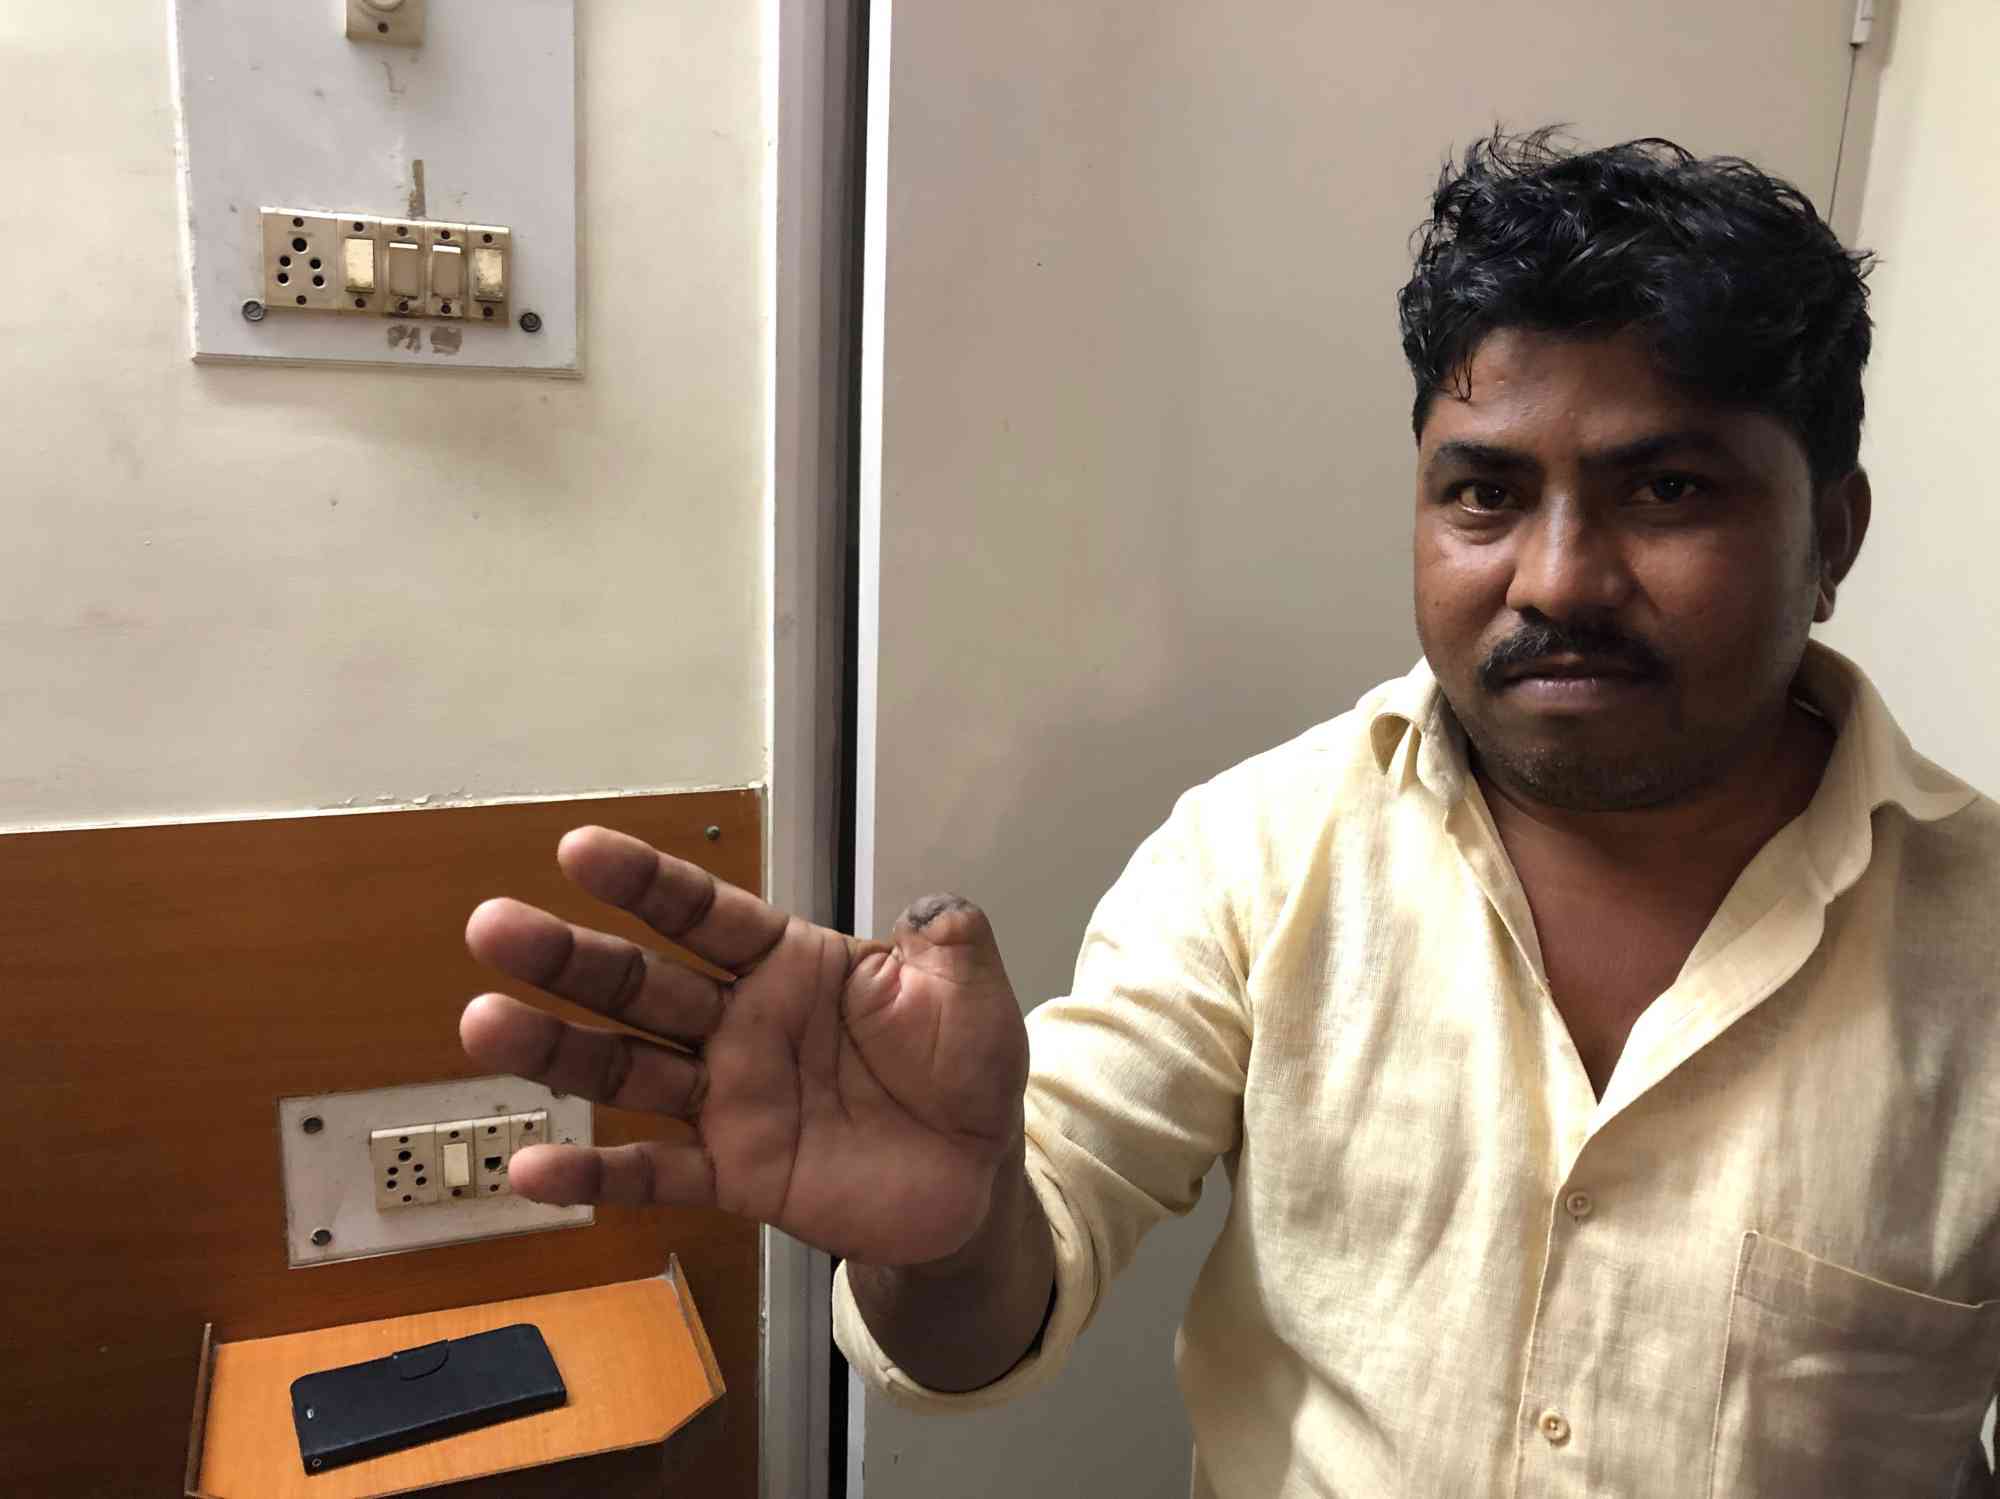 Sanitation worker Sanjay Pandharina Gote lost his thumb in the hydraulic cylinder of a garbage truck. (Photo credit: Sujatha Fernandes).